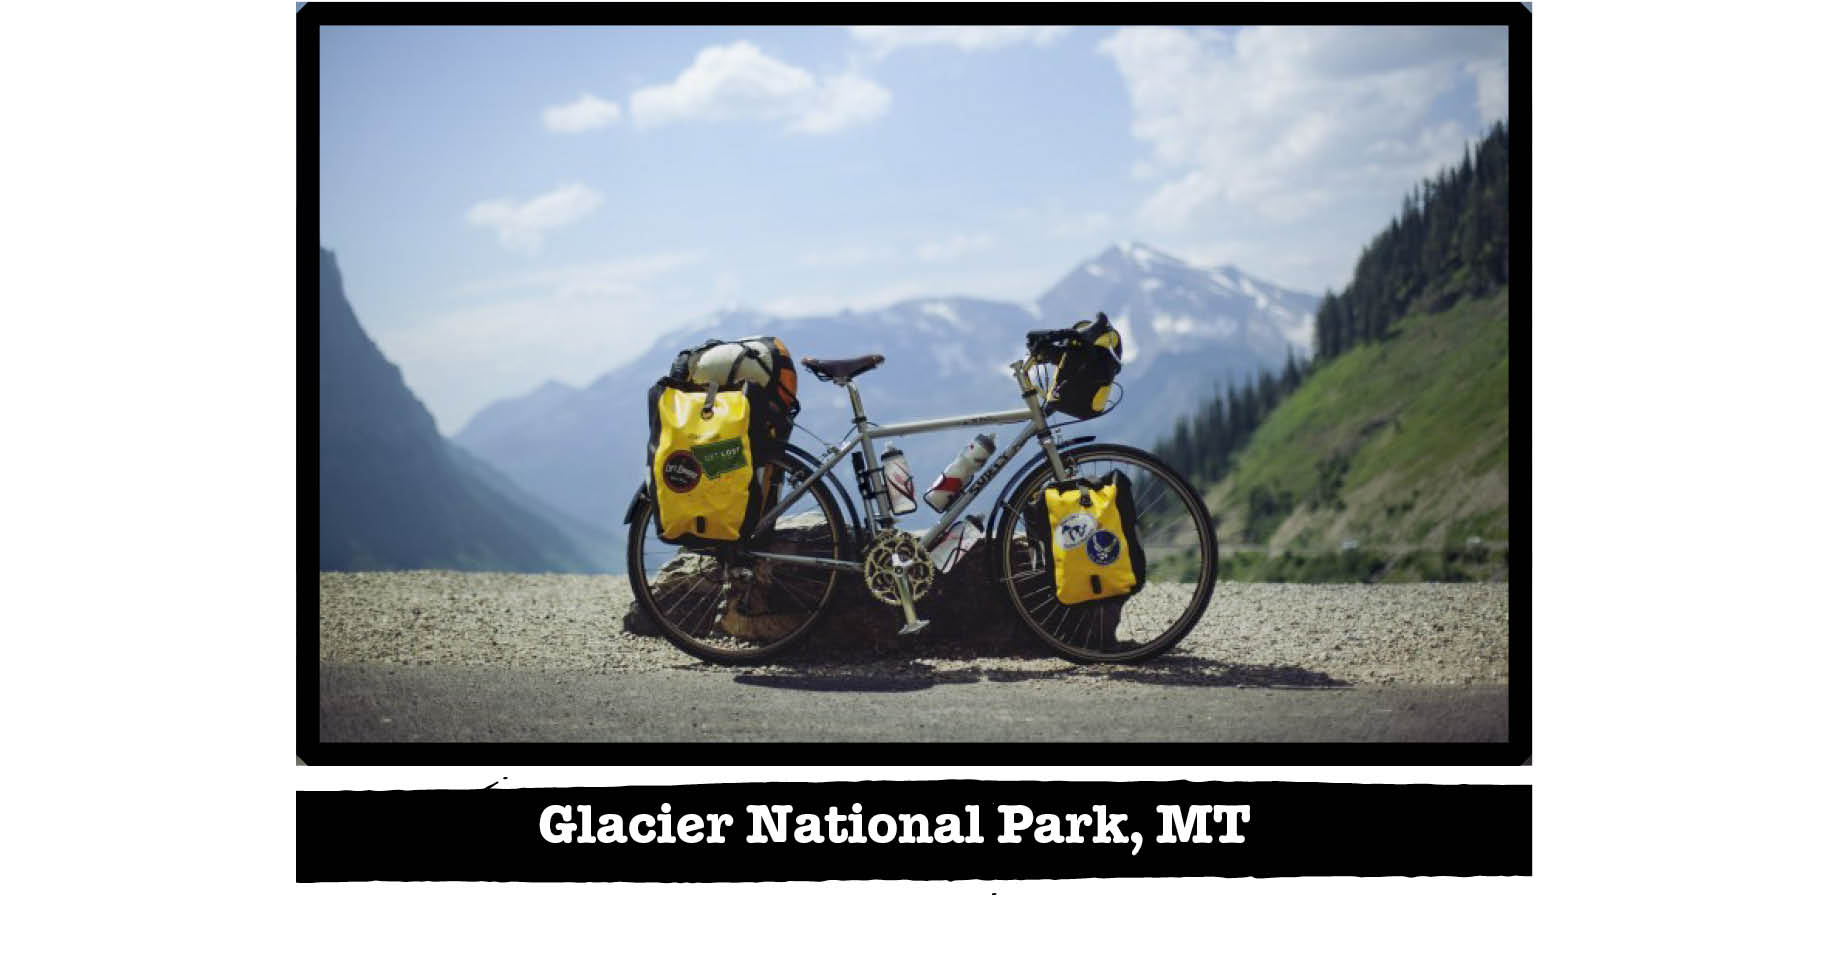 Right view of Surly Trucker bike on the edge of a road in the mountains - Glacier National Park, MT tag below image